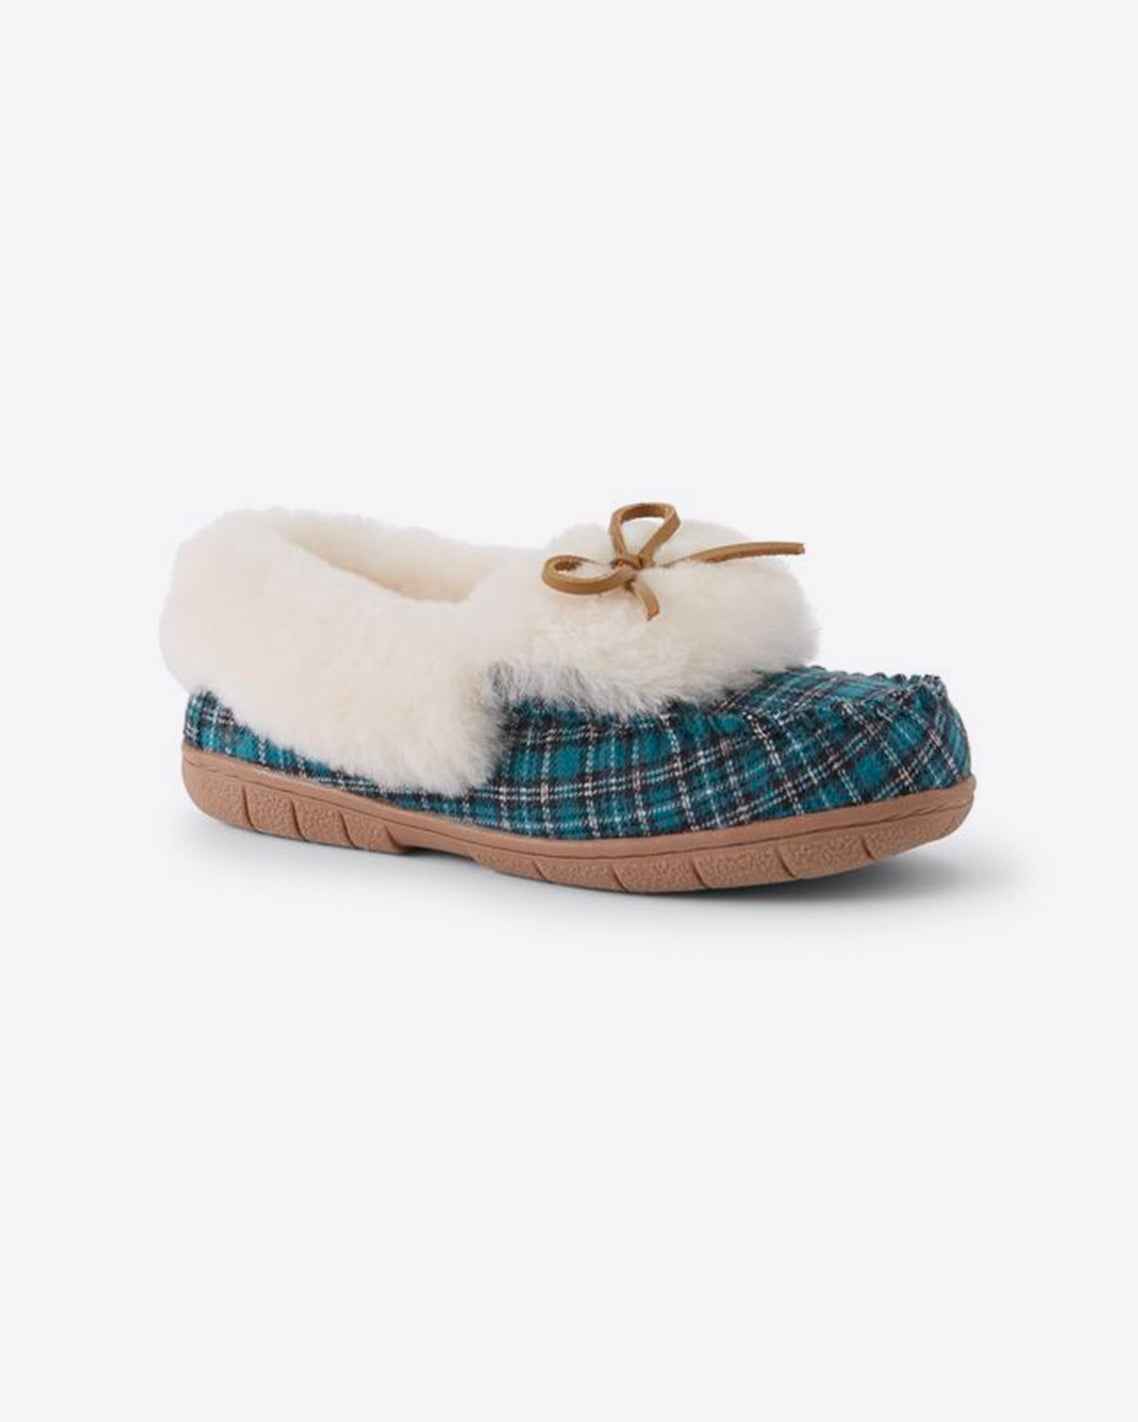 DJ x Lands' End Women's Plaid Shearling Moccasin Slippers